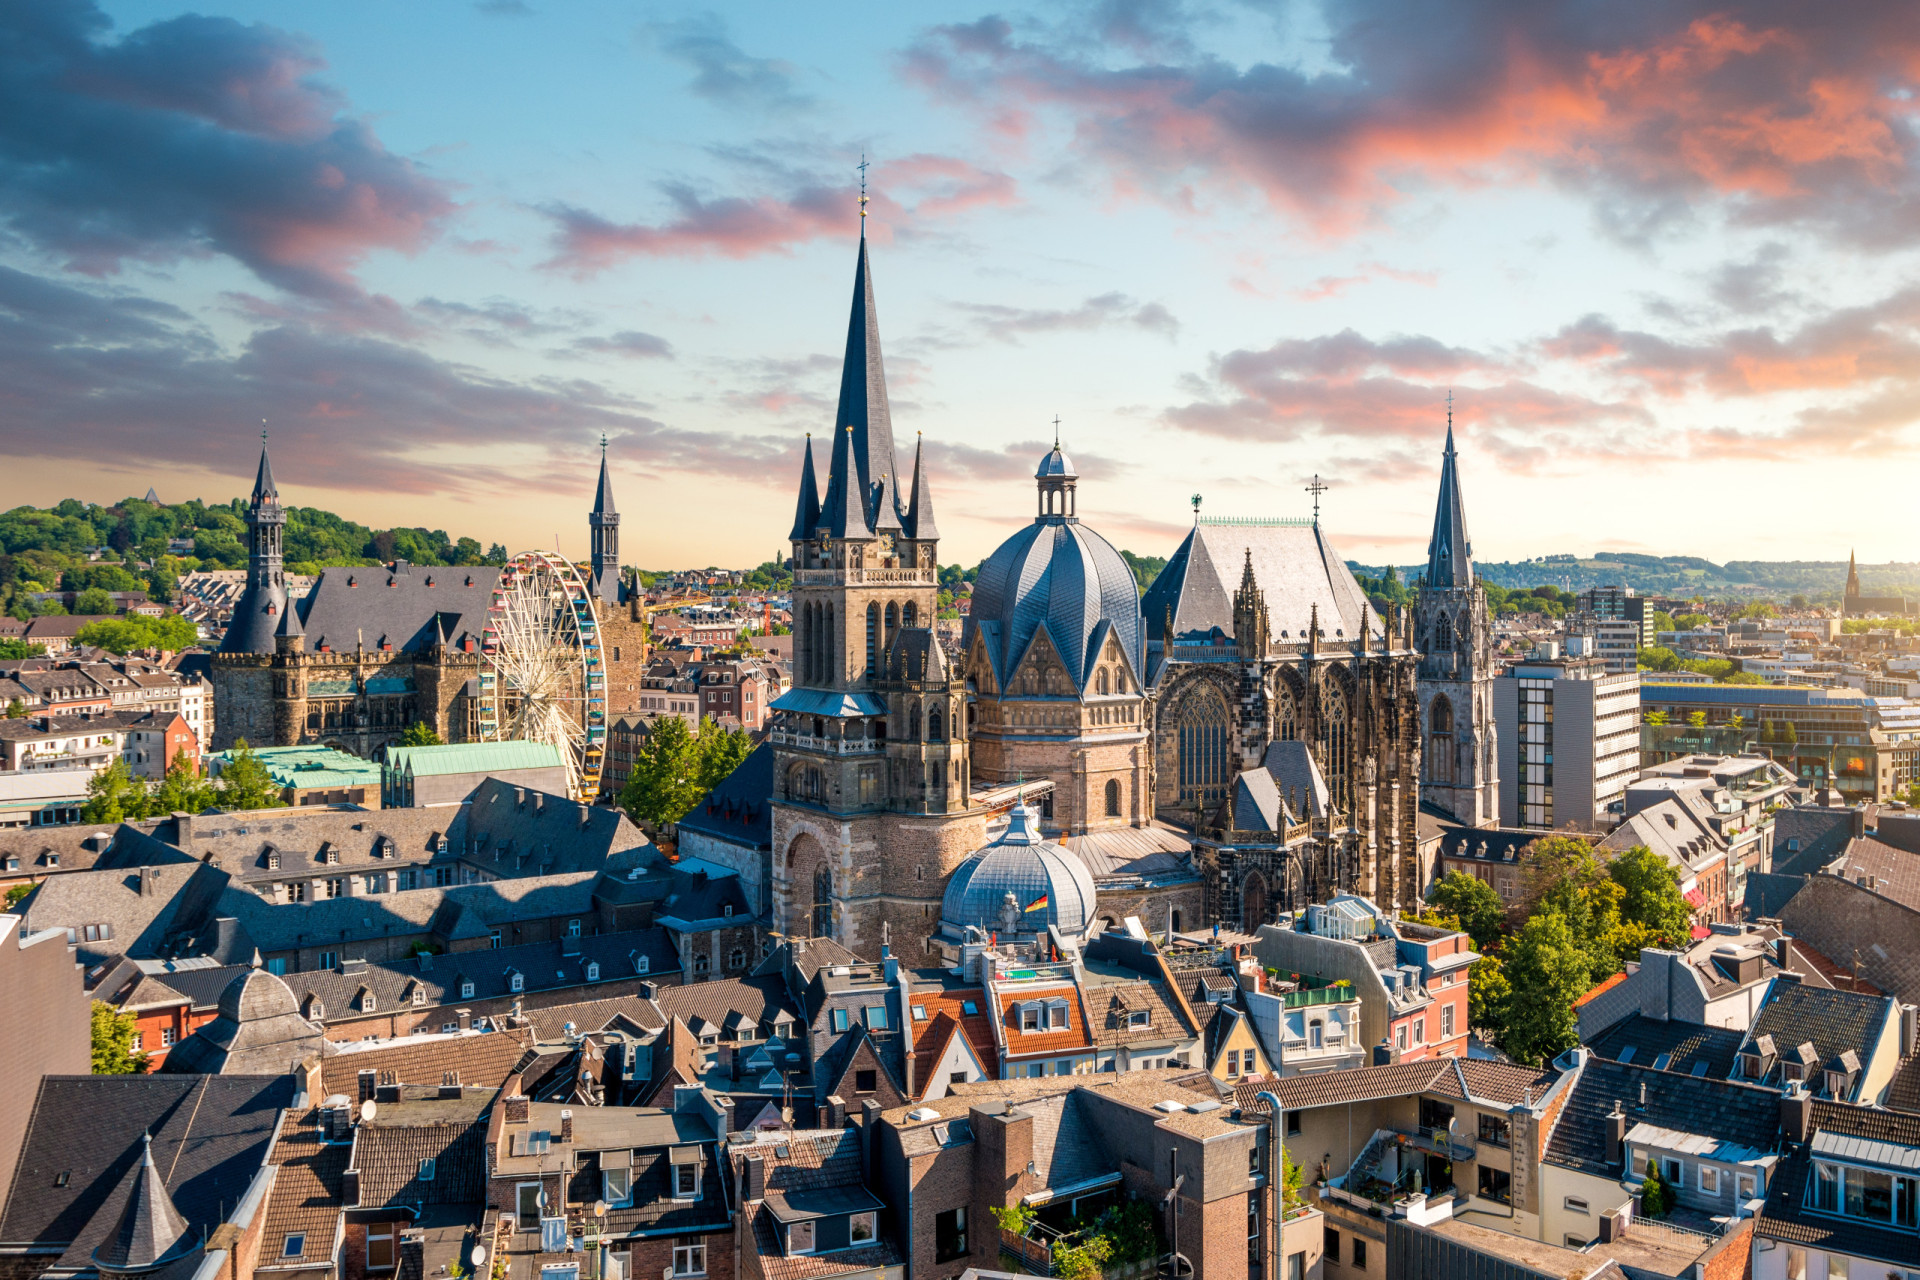 <p>After a leisurely helicopter flight lasting about 10 minutes, you can safely say that your feet have touched German ground. More specifically, you would land in Aachen, a city that intersects beautifully with the borders of Belgium and the Netherlands.</p><p><a href="https://www.msn.com/en-us/community/channel/vid-7xx8mnucu55yw63we9va2gwr7uihbxwc68fxqp25x6tg4ftibpra?cvid=94631541bc0f4f89bfd59158d696ad7e">Follow us and access great exclusive content every day</a></p>